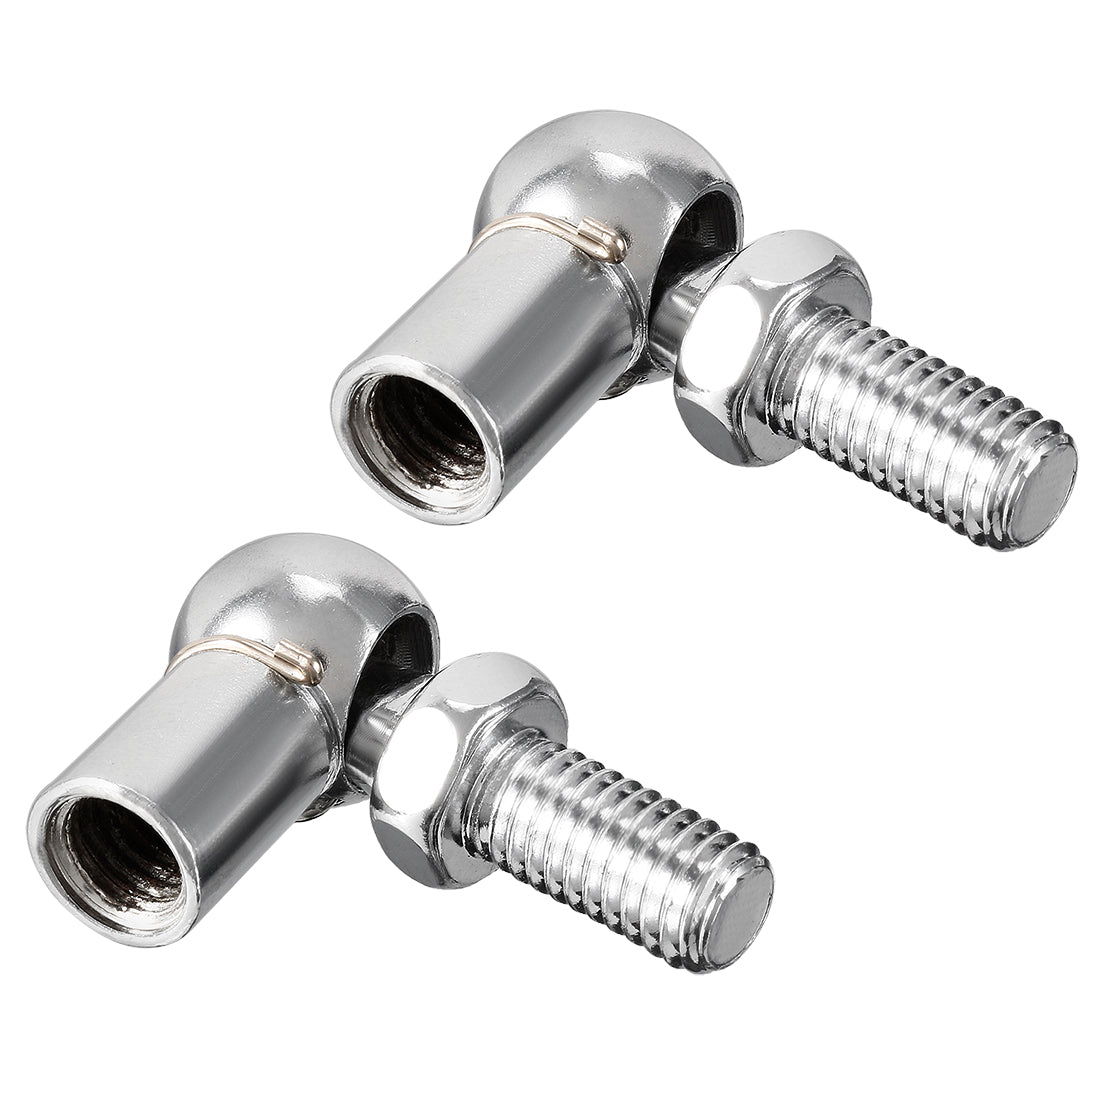 Uxcell Uxcell Gas Spring End Fitting M8 Female Thread 8mm Round Handle Dia A3 Steel 2pcs